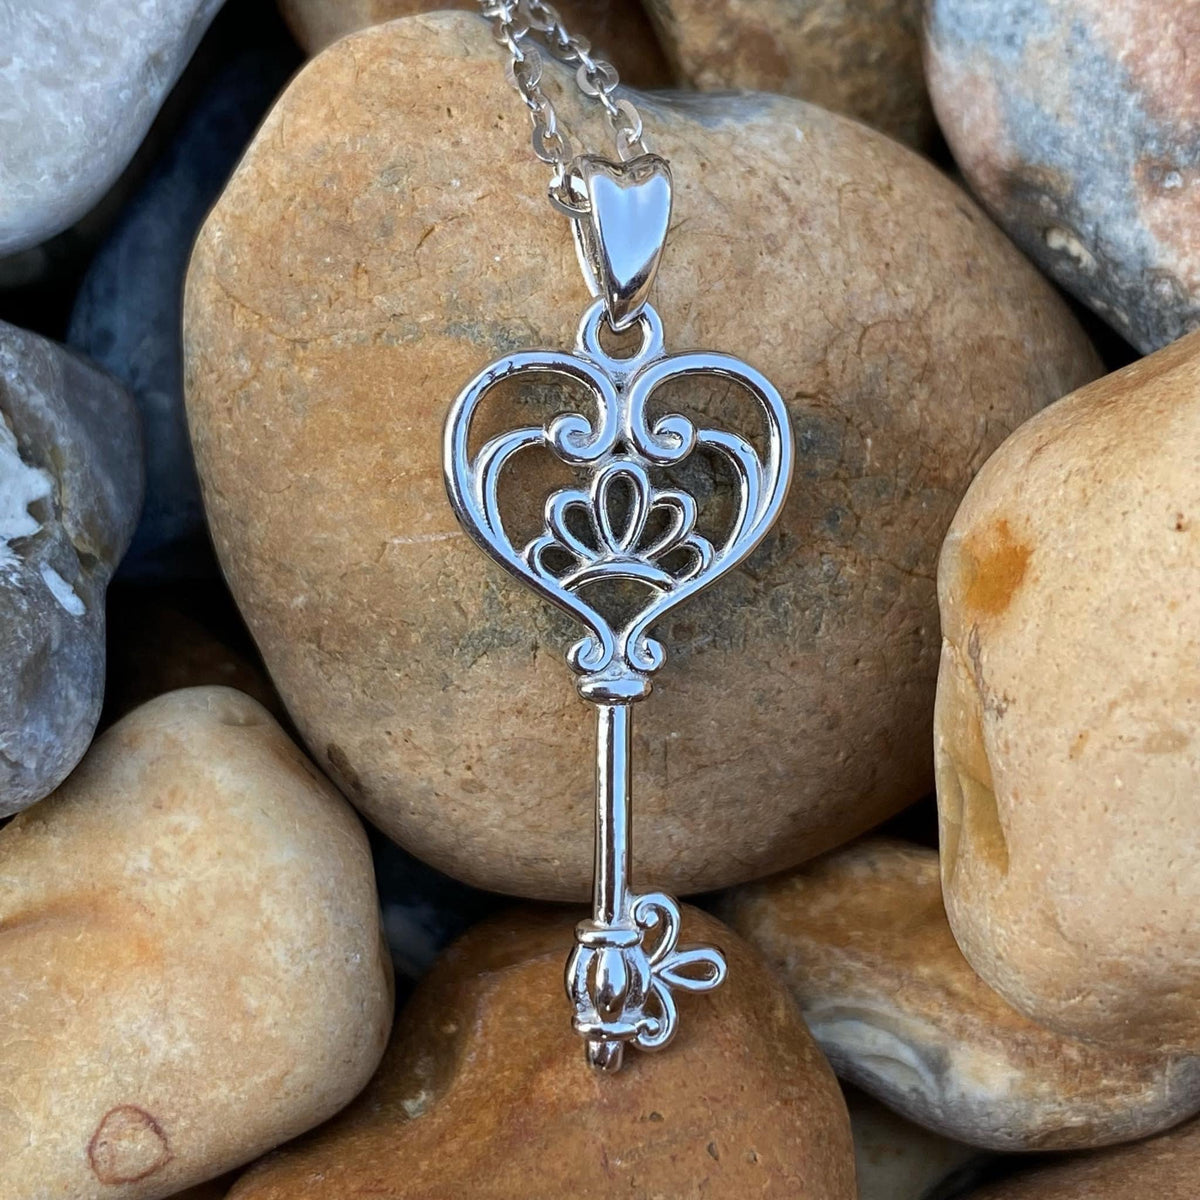 Sterling Forever Heart Key Pendant Necklace - Silver